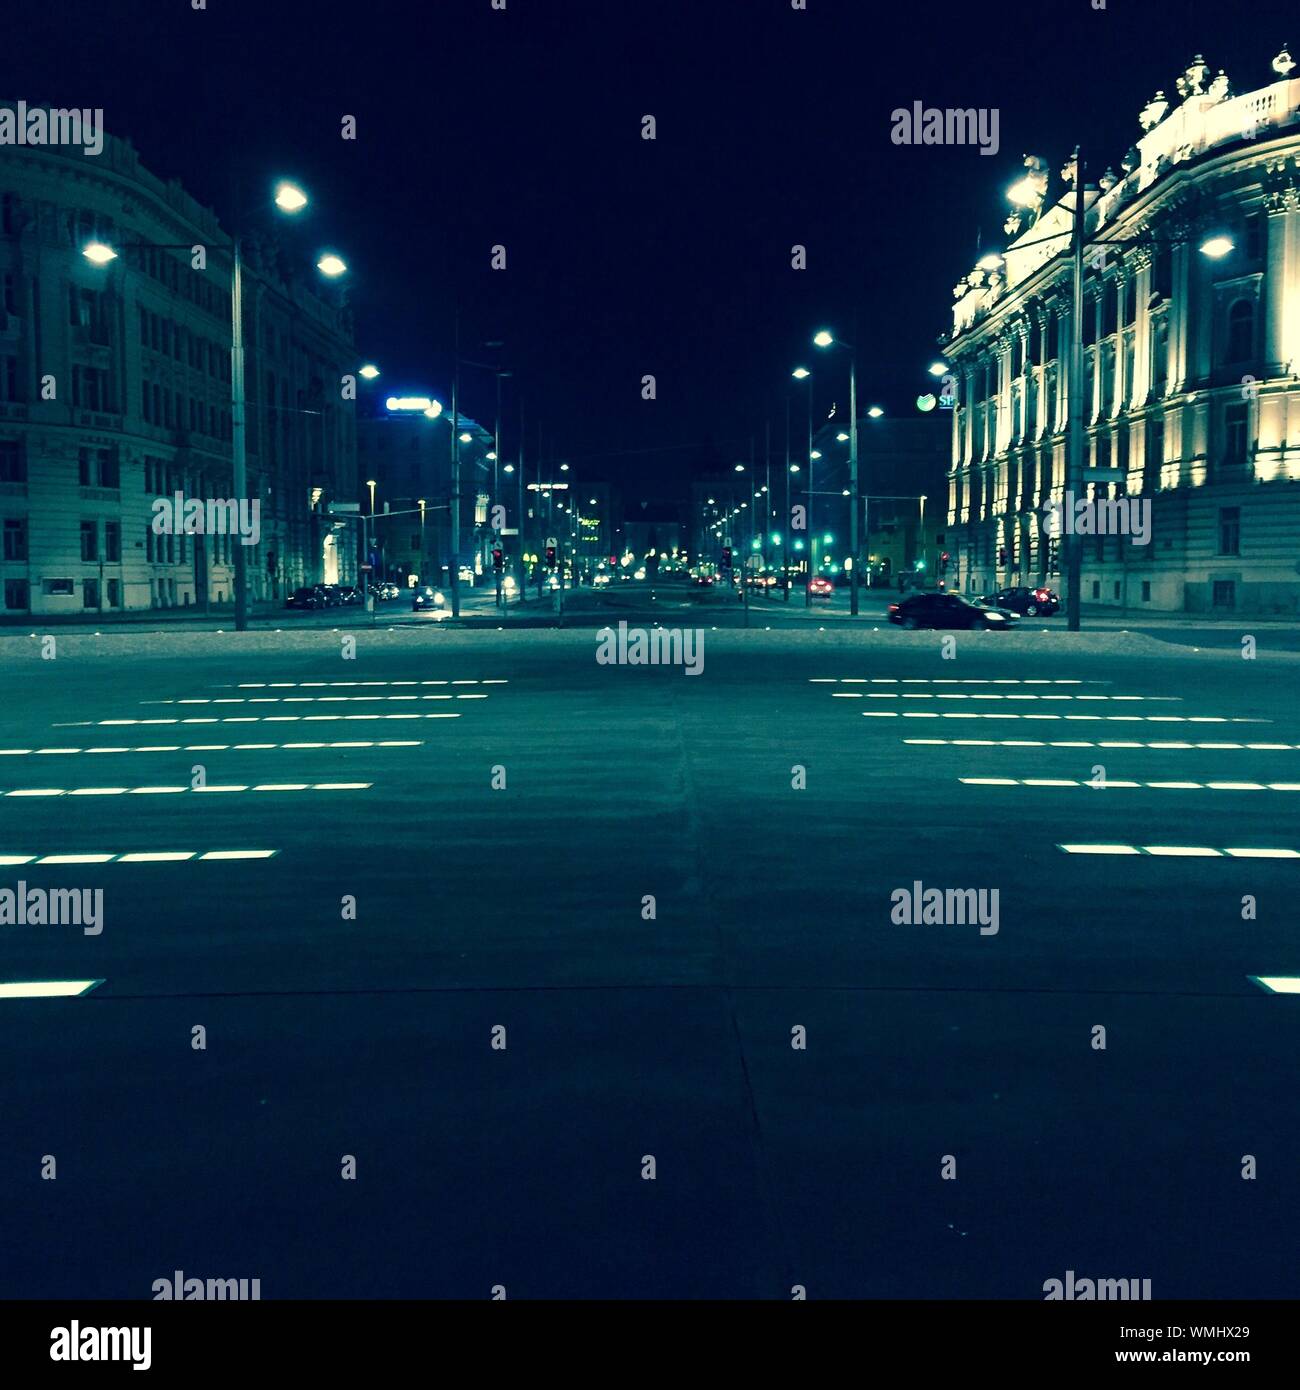 Pedestrian Crossings On Road In City At Night Stock Photo